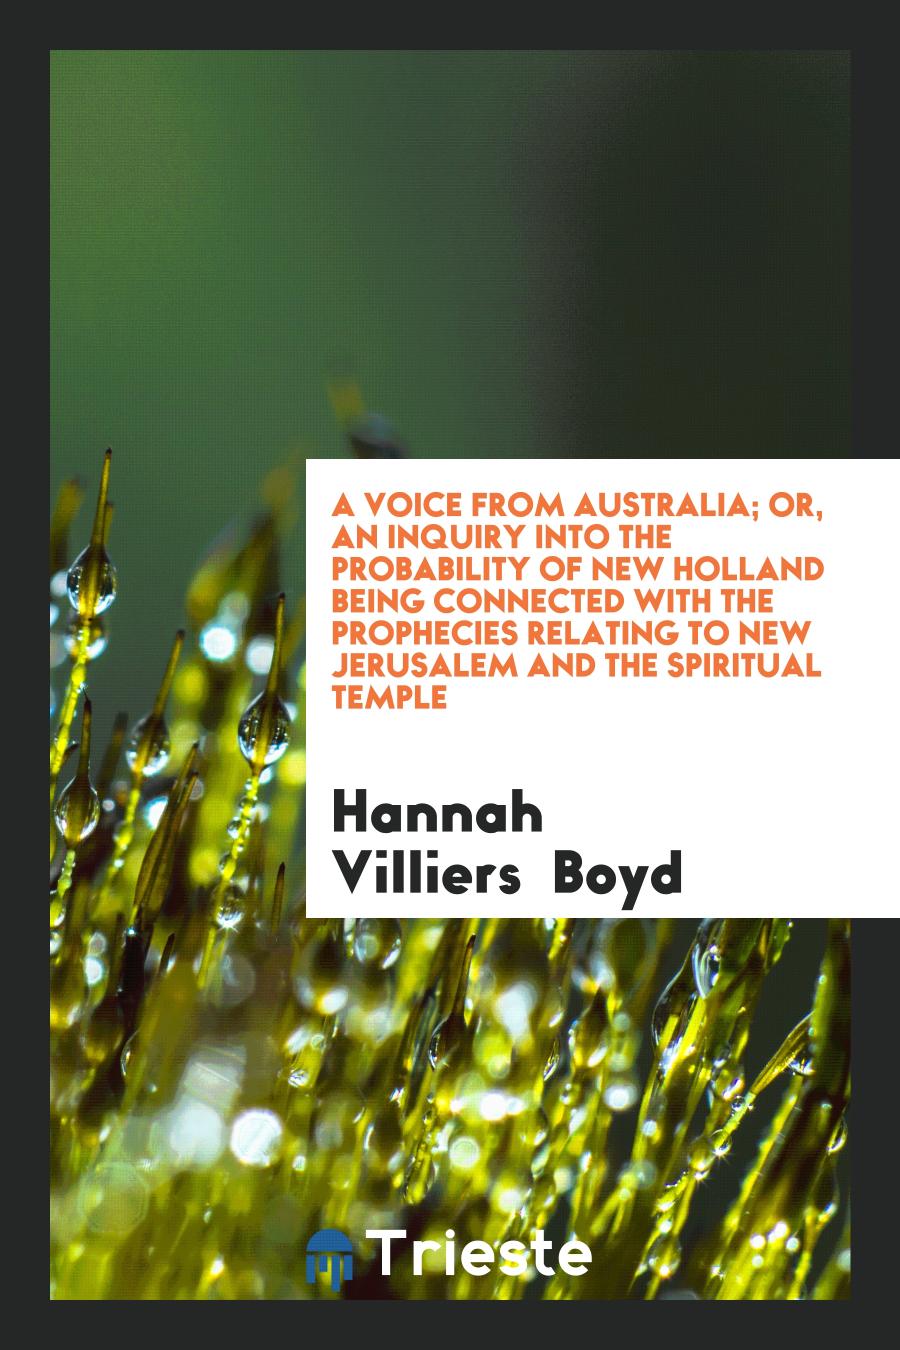 A Voice from Australia; Or, an Inquiry into the Probability of New Holland Being Connected with the Prophecies Relating to New Jerusalem and the Spiritual Temple